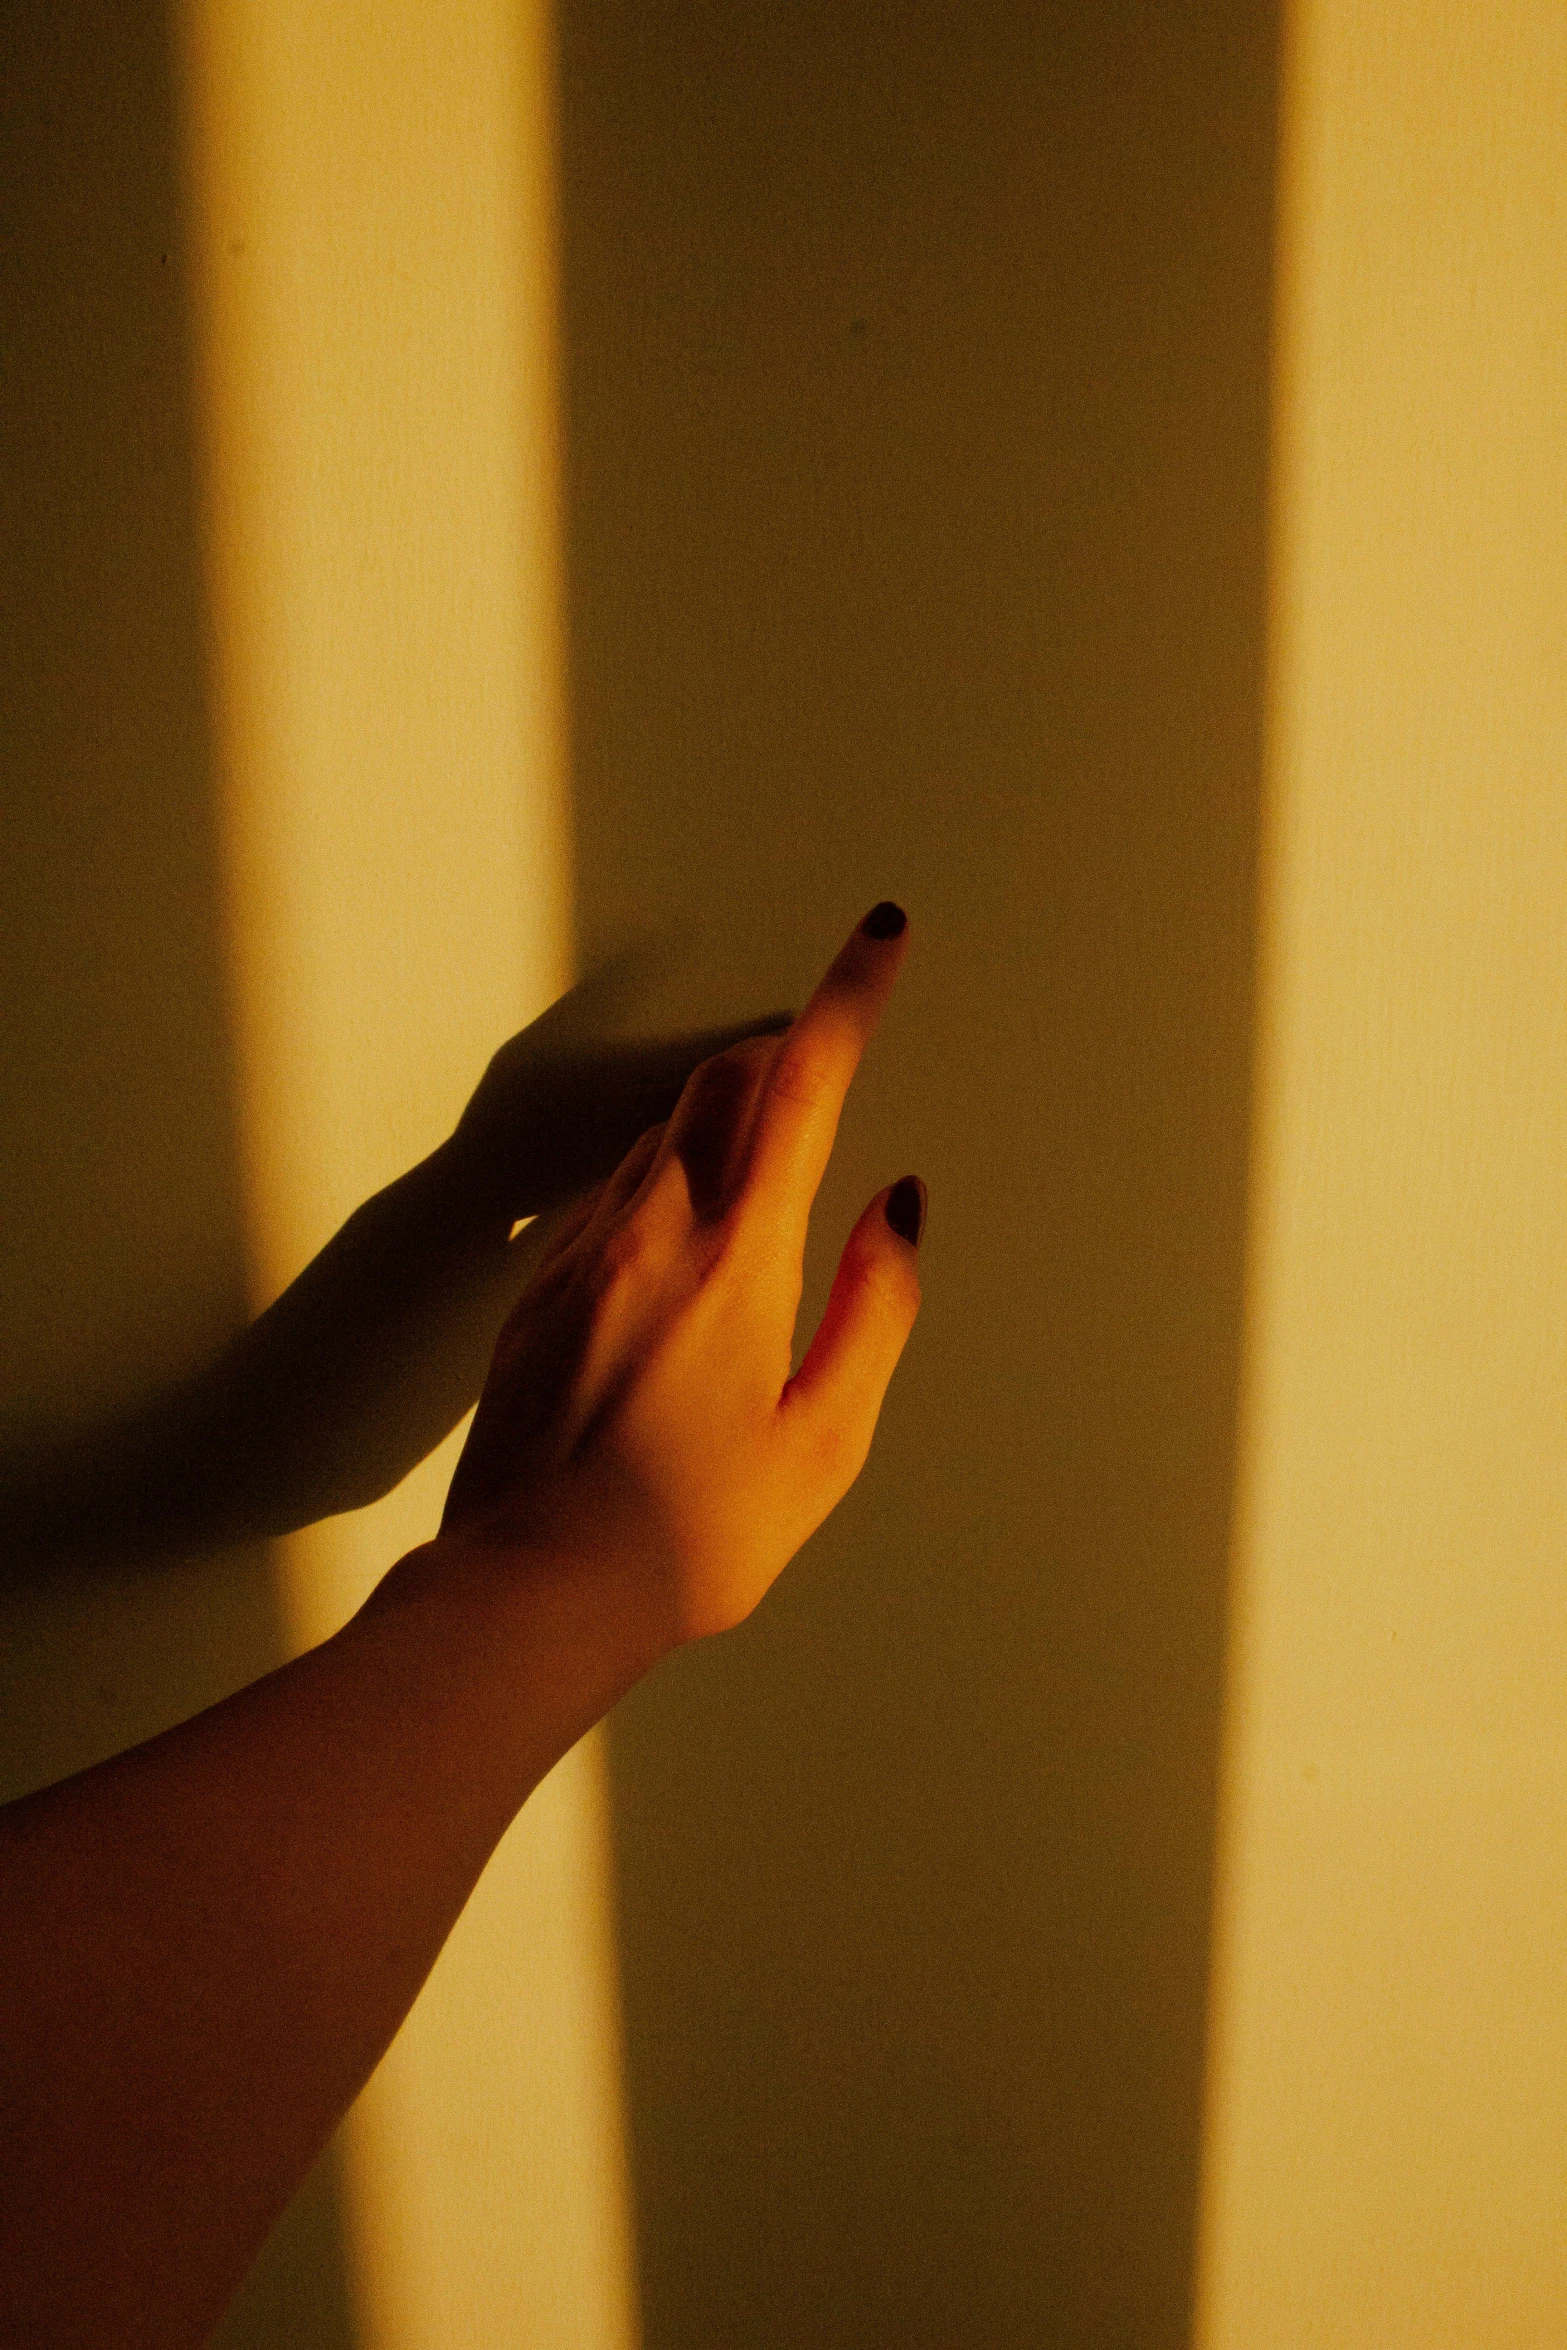 the shadow of a hand casting long shadows onto a wall